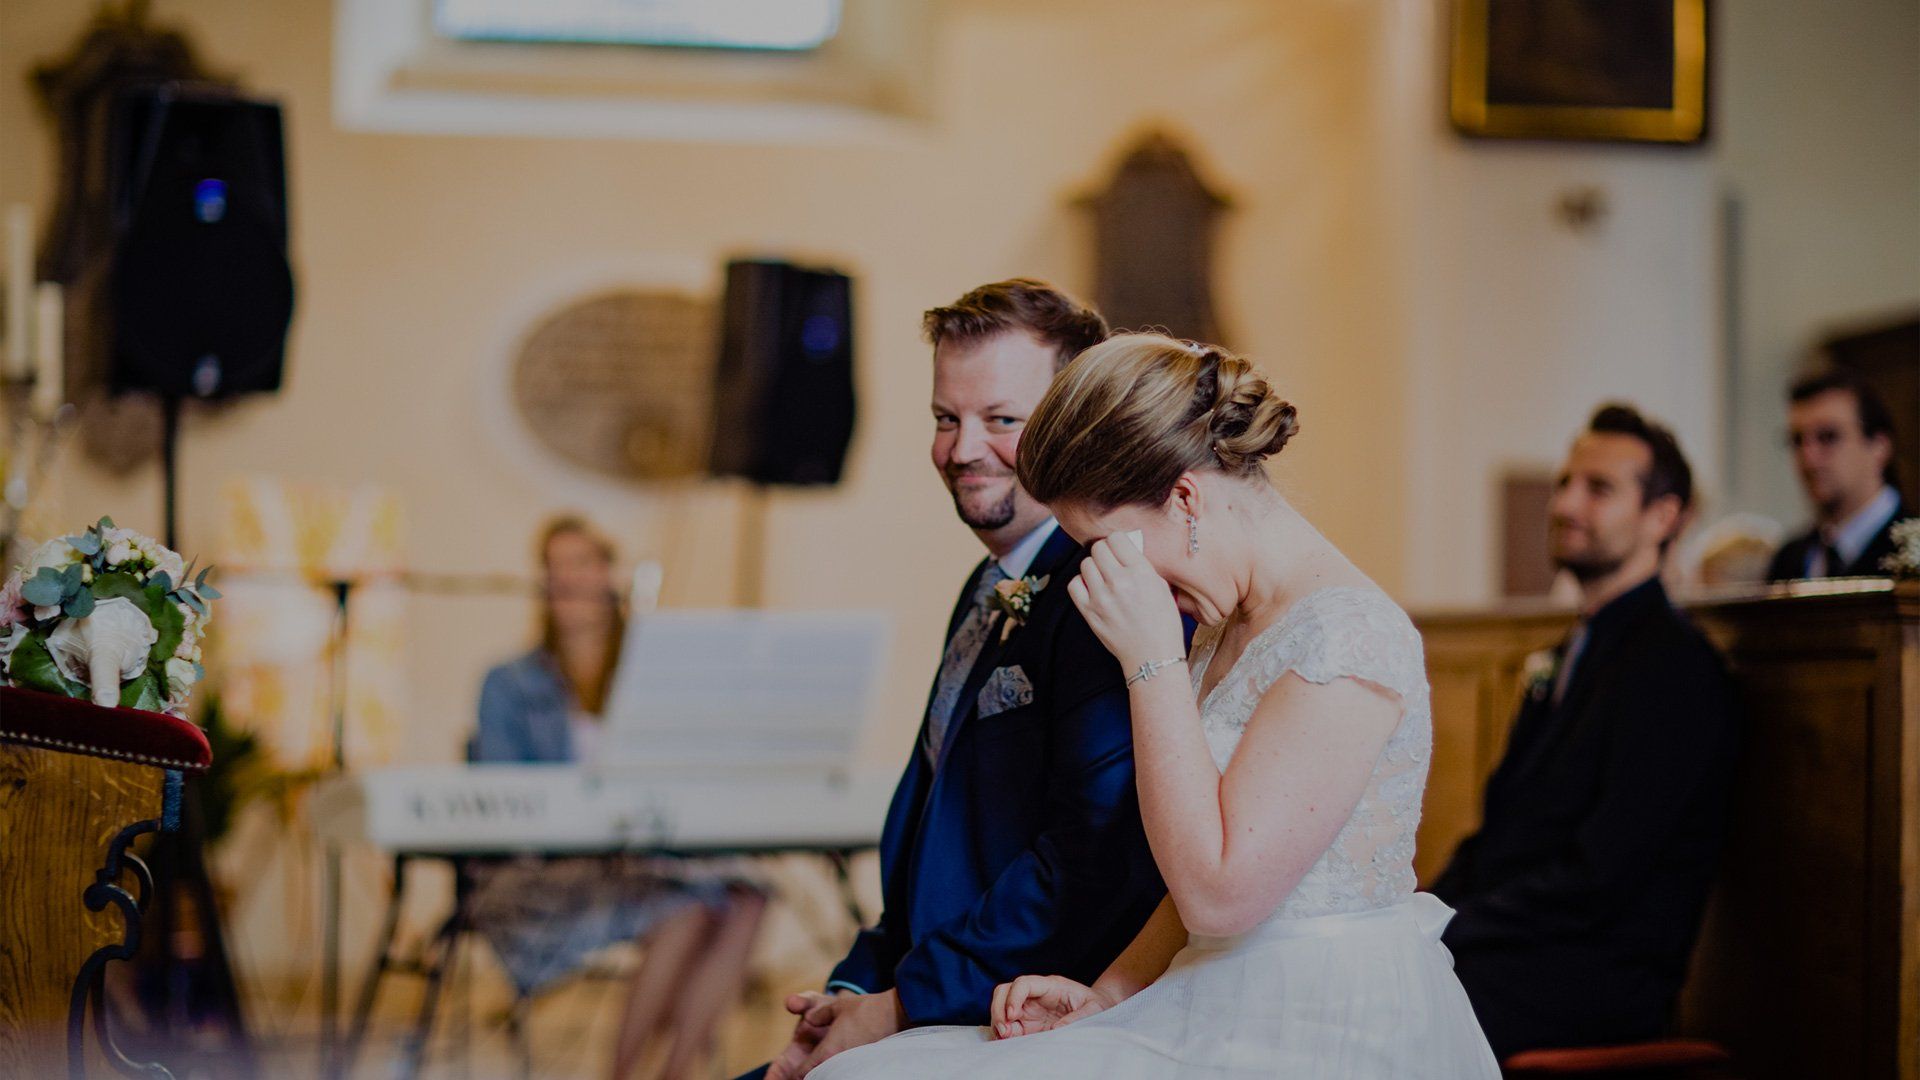 A bride and groom sat in a church, the bride is wiping her eyes.